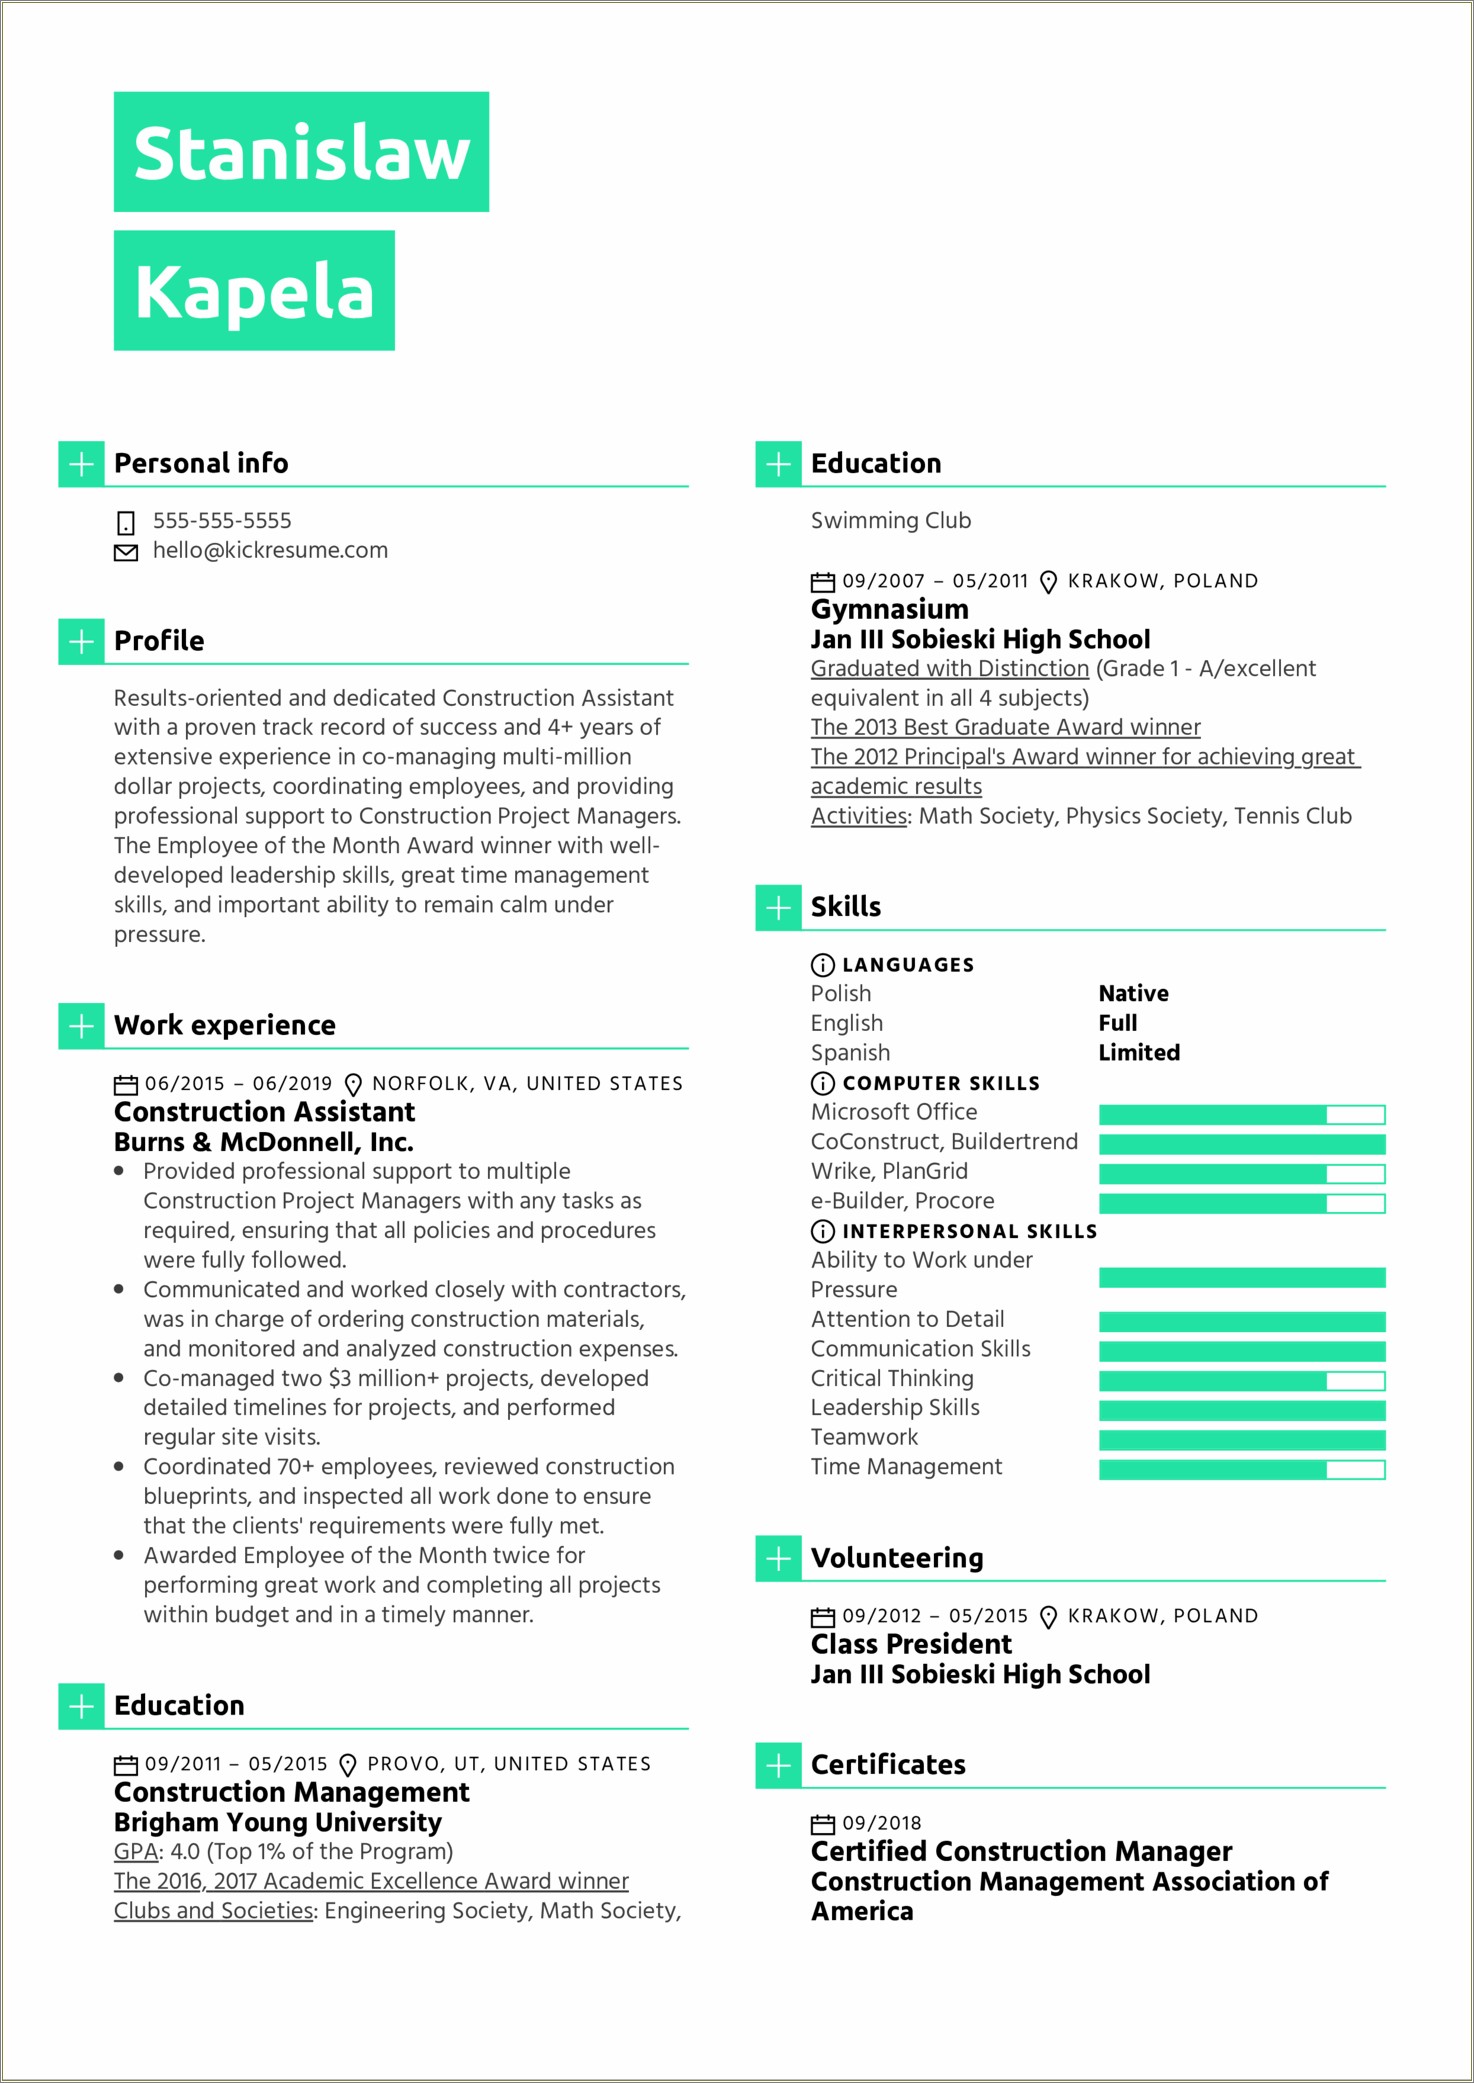 Examples Of Outstanding Assistant Principal Resumes